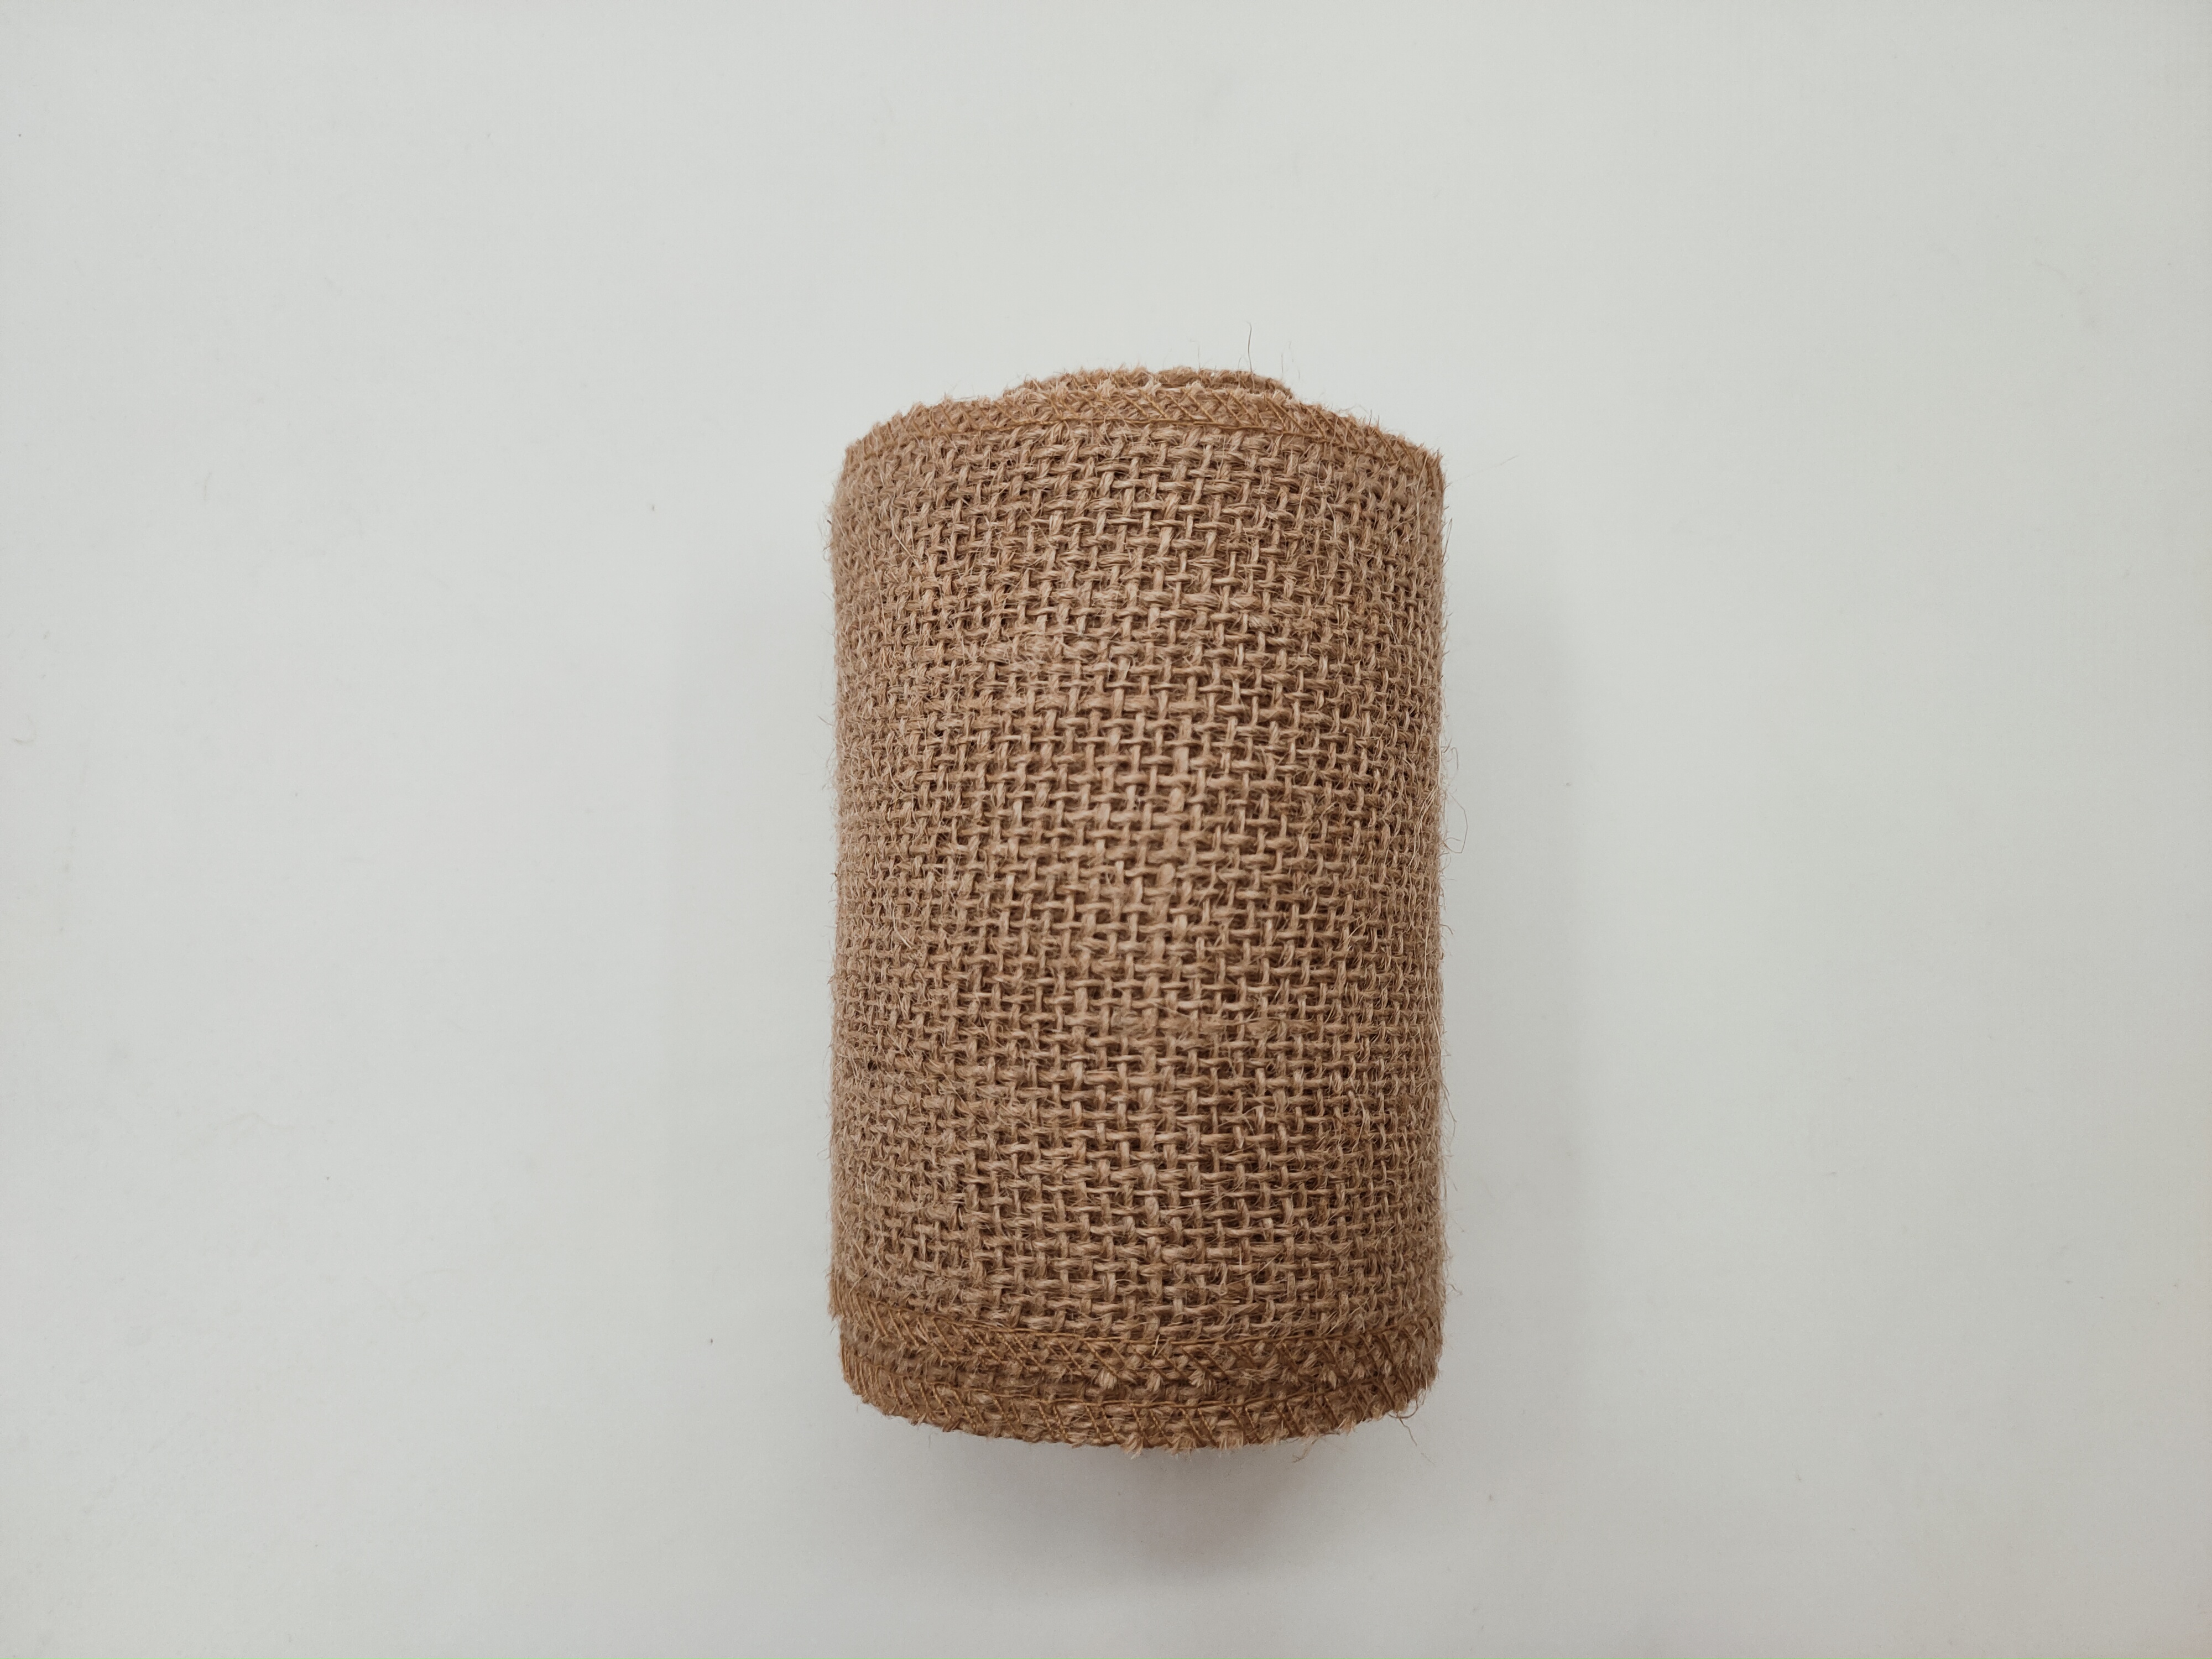 Burlap is a Finely Woven Fabric